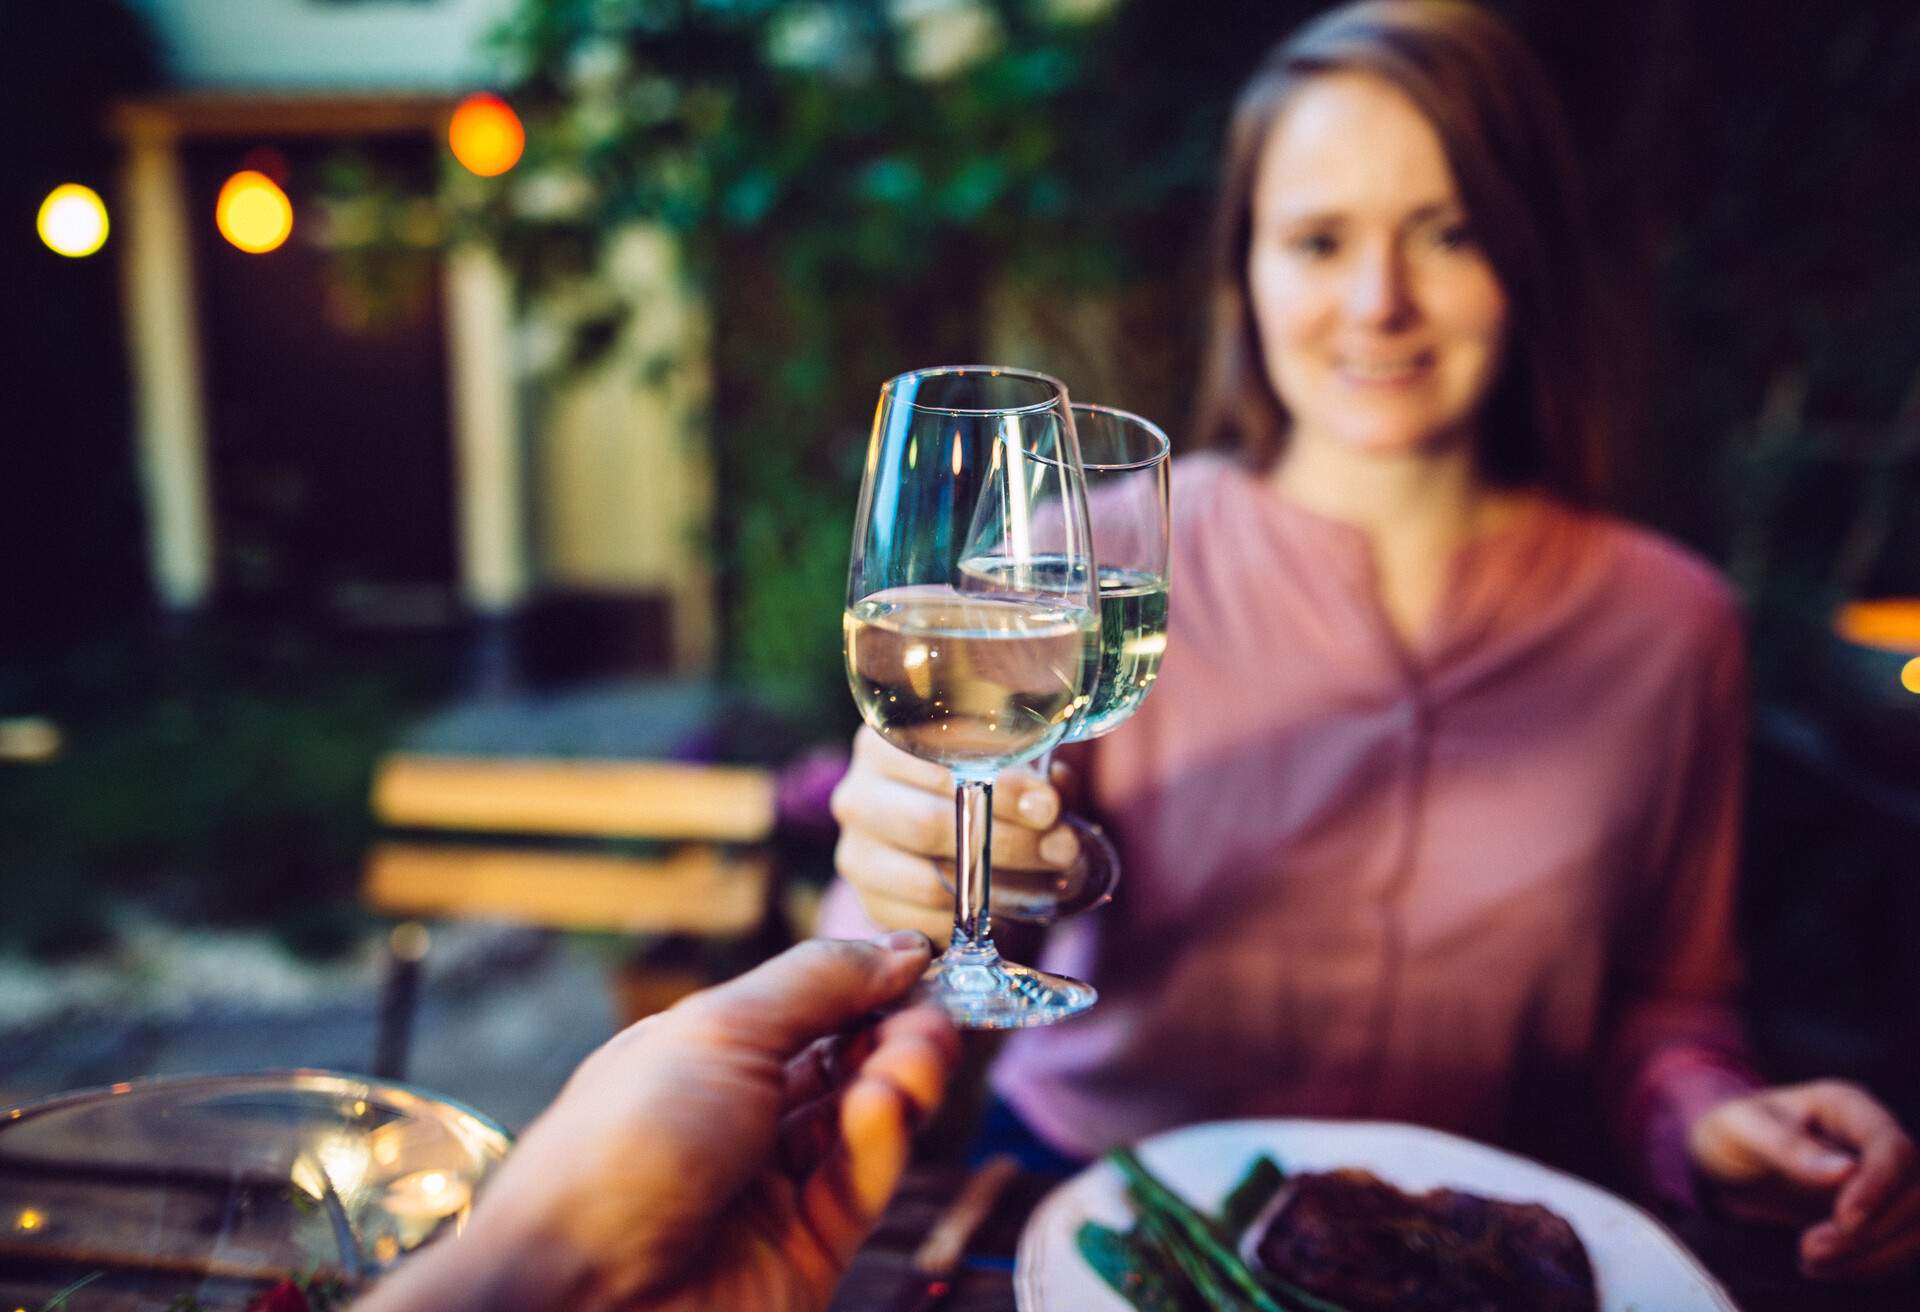 Couple cheering with glass of wine while having a romantic dinner outdoor.